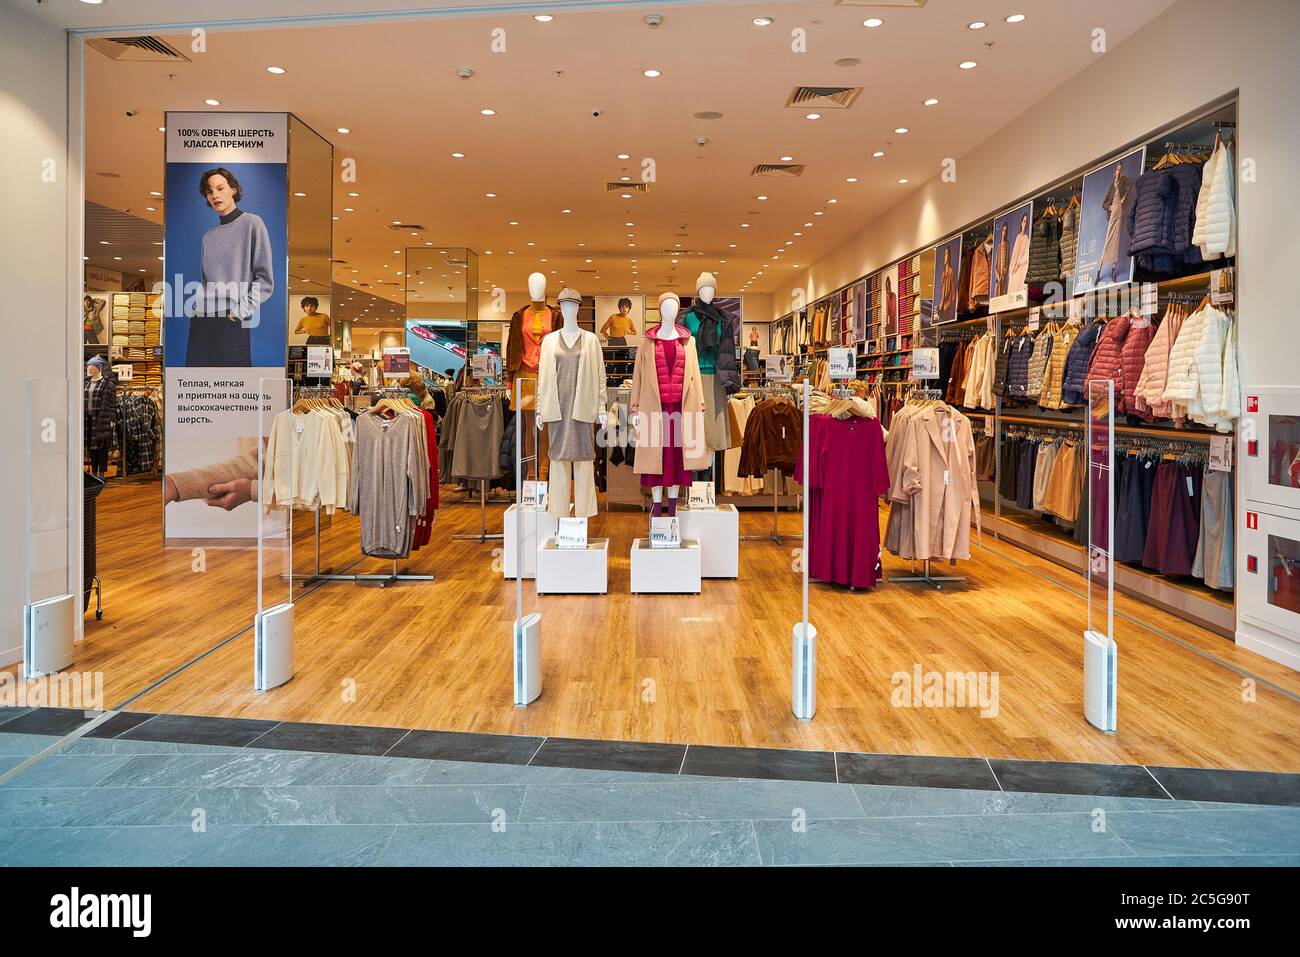 MOSCOW, RUSSIA - SEPTEMBER 14, 2019: Interior Shot Of Uniqlo Store